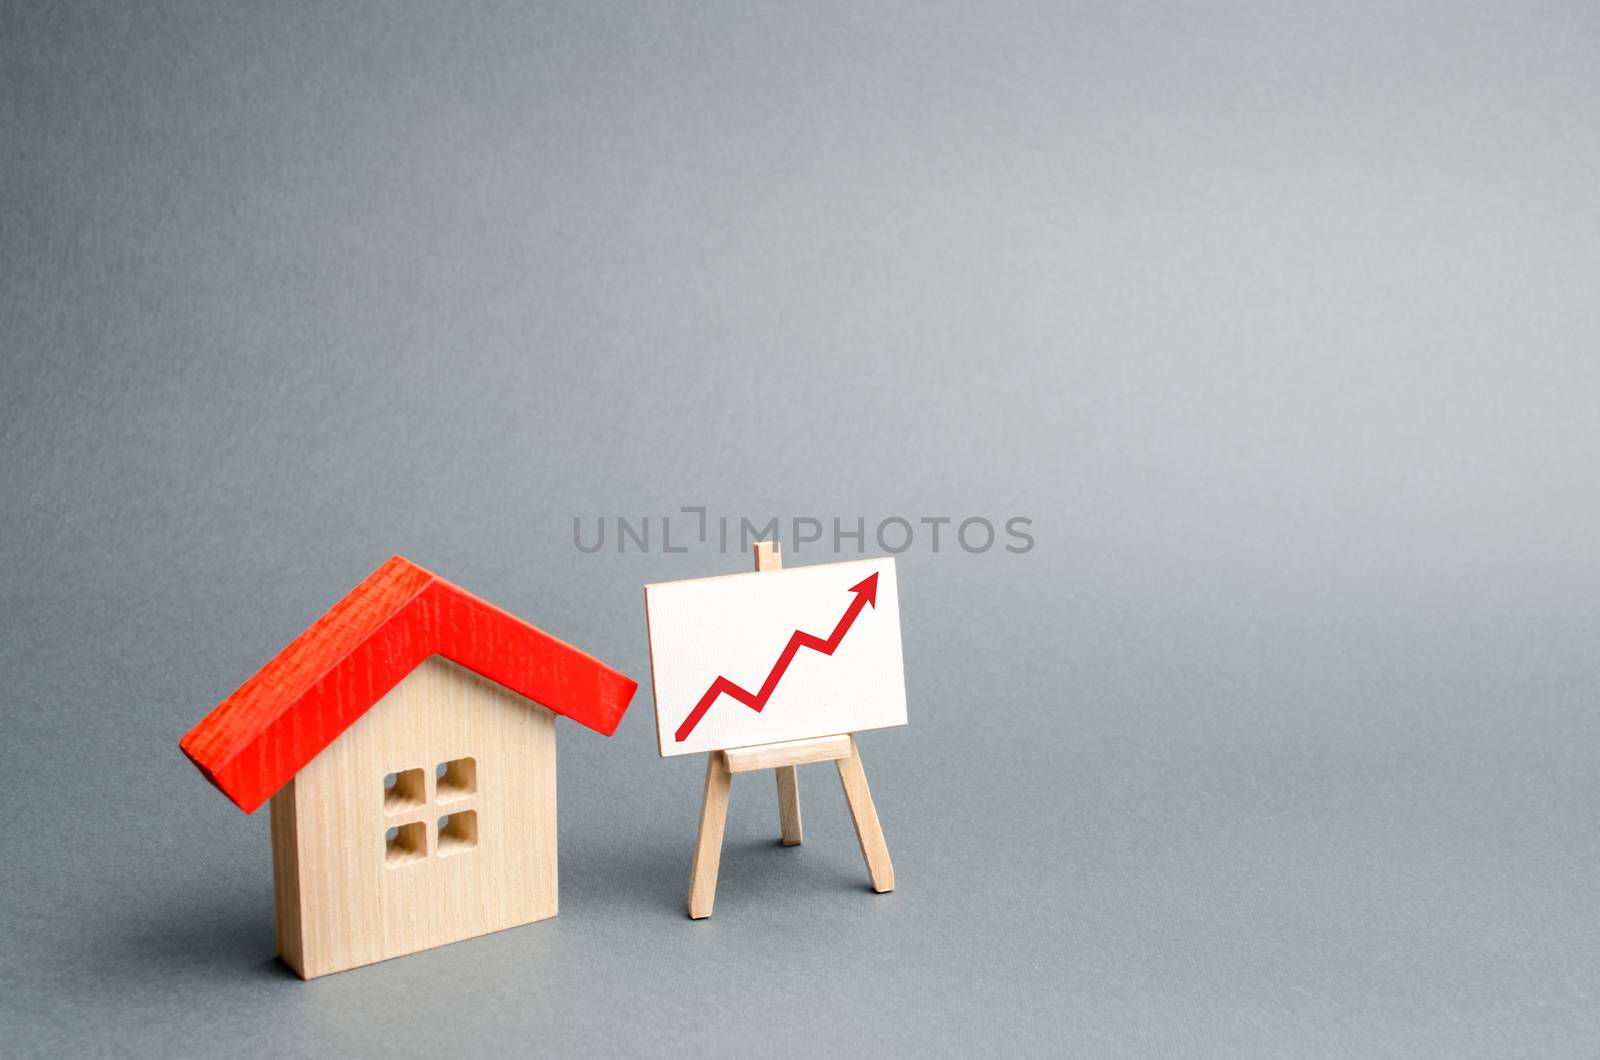 Wooden house and stand with red arrow up. Growing demand for housing and real estate. The growth of the city and its population. Investments. concept of rising prices for housing. Selective focus